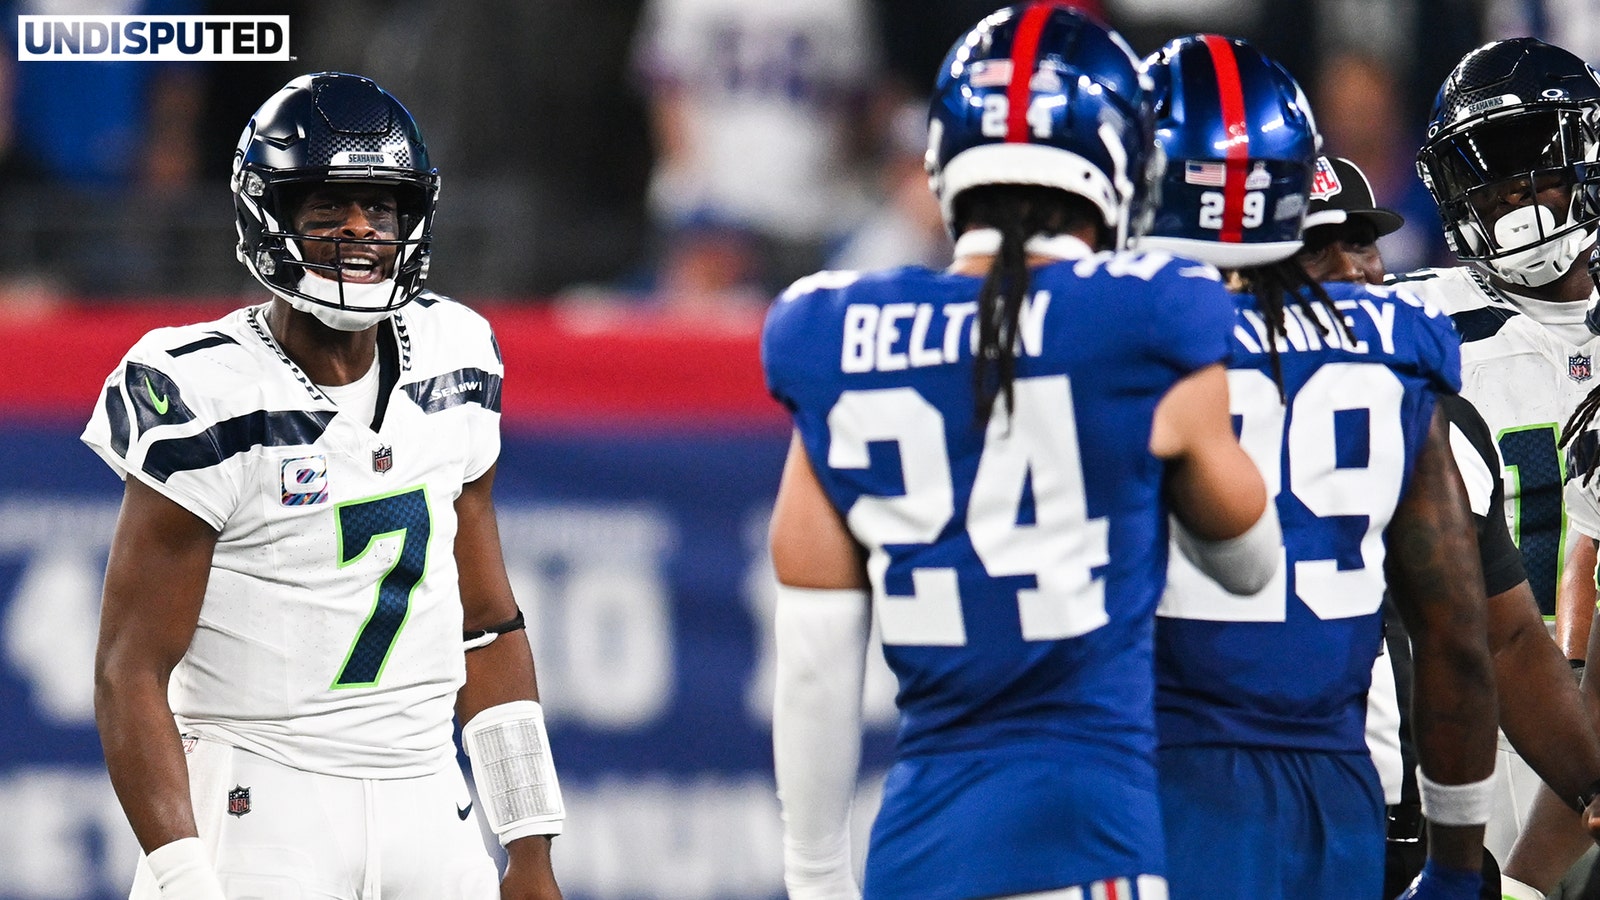 "Undisputed" reacts to Seahawks dominating Giants on Monday Night Football